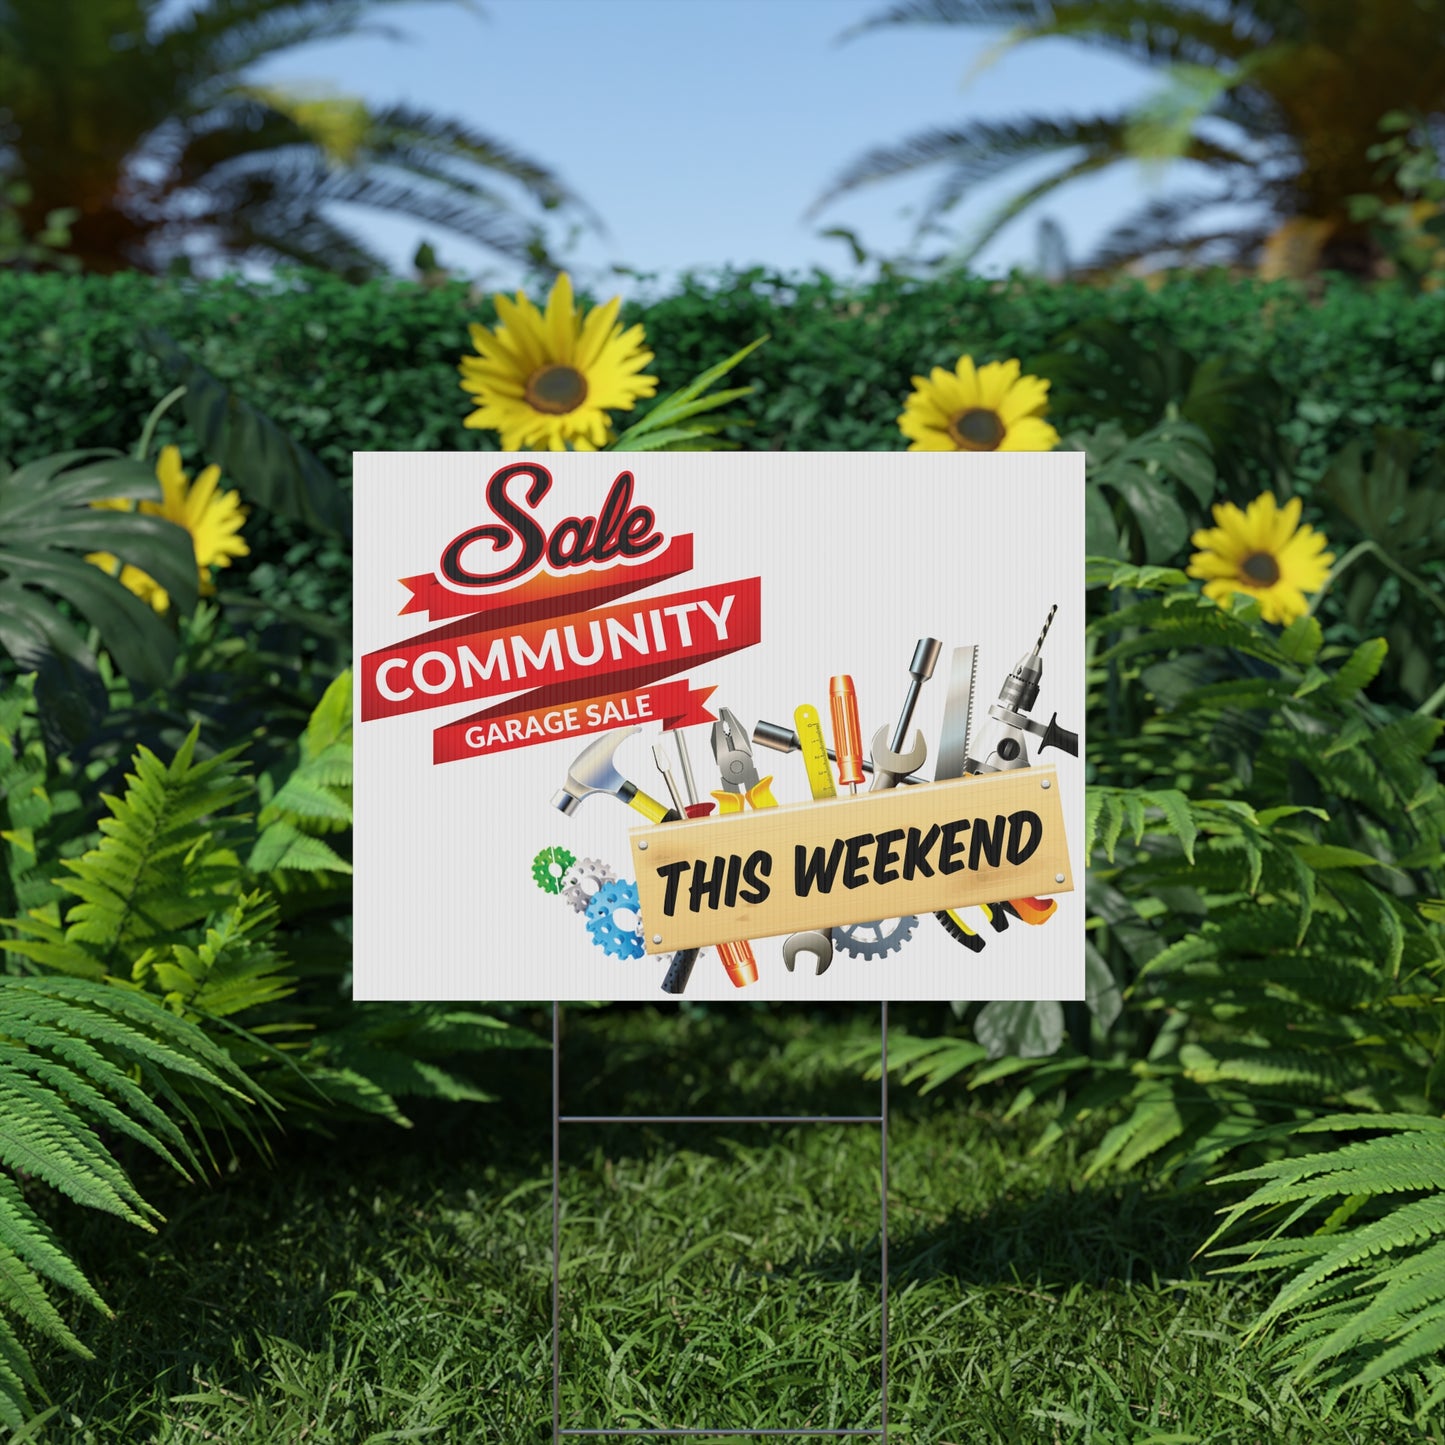 Community Garage Sale, Yard Sale Sign, 24x18 or 36x24 inch, Double Sided, H-Stake Included, v2